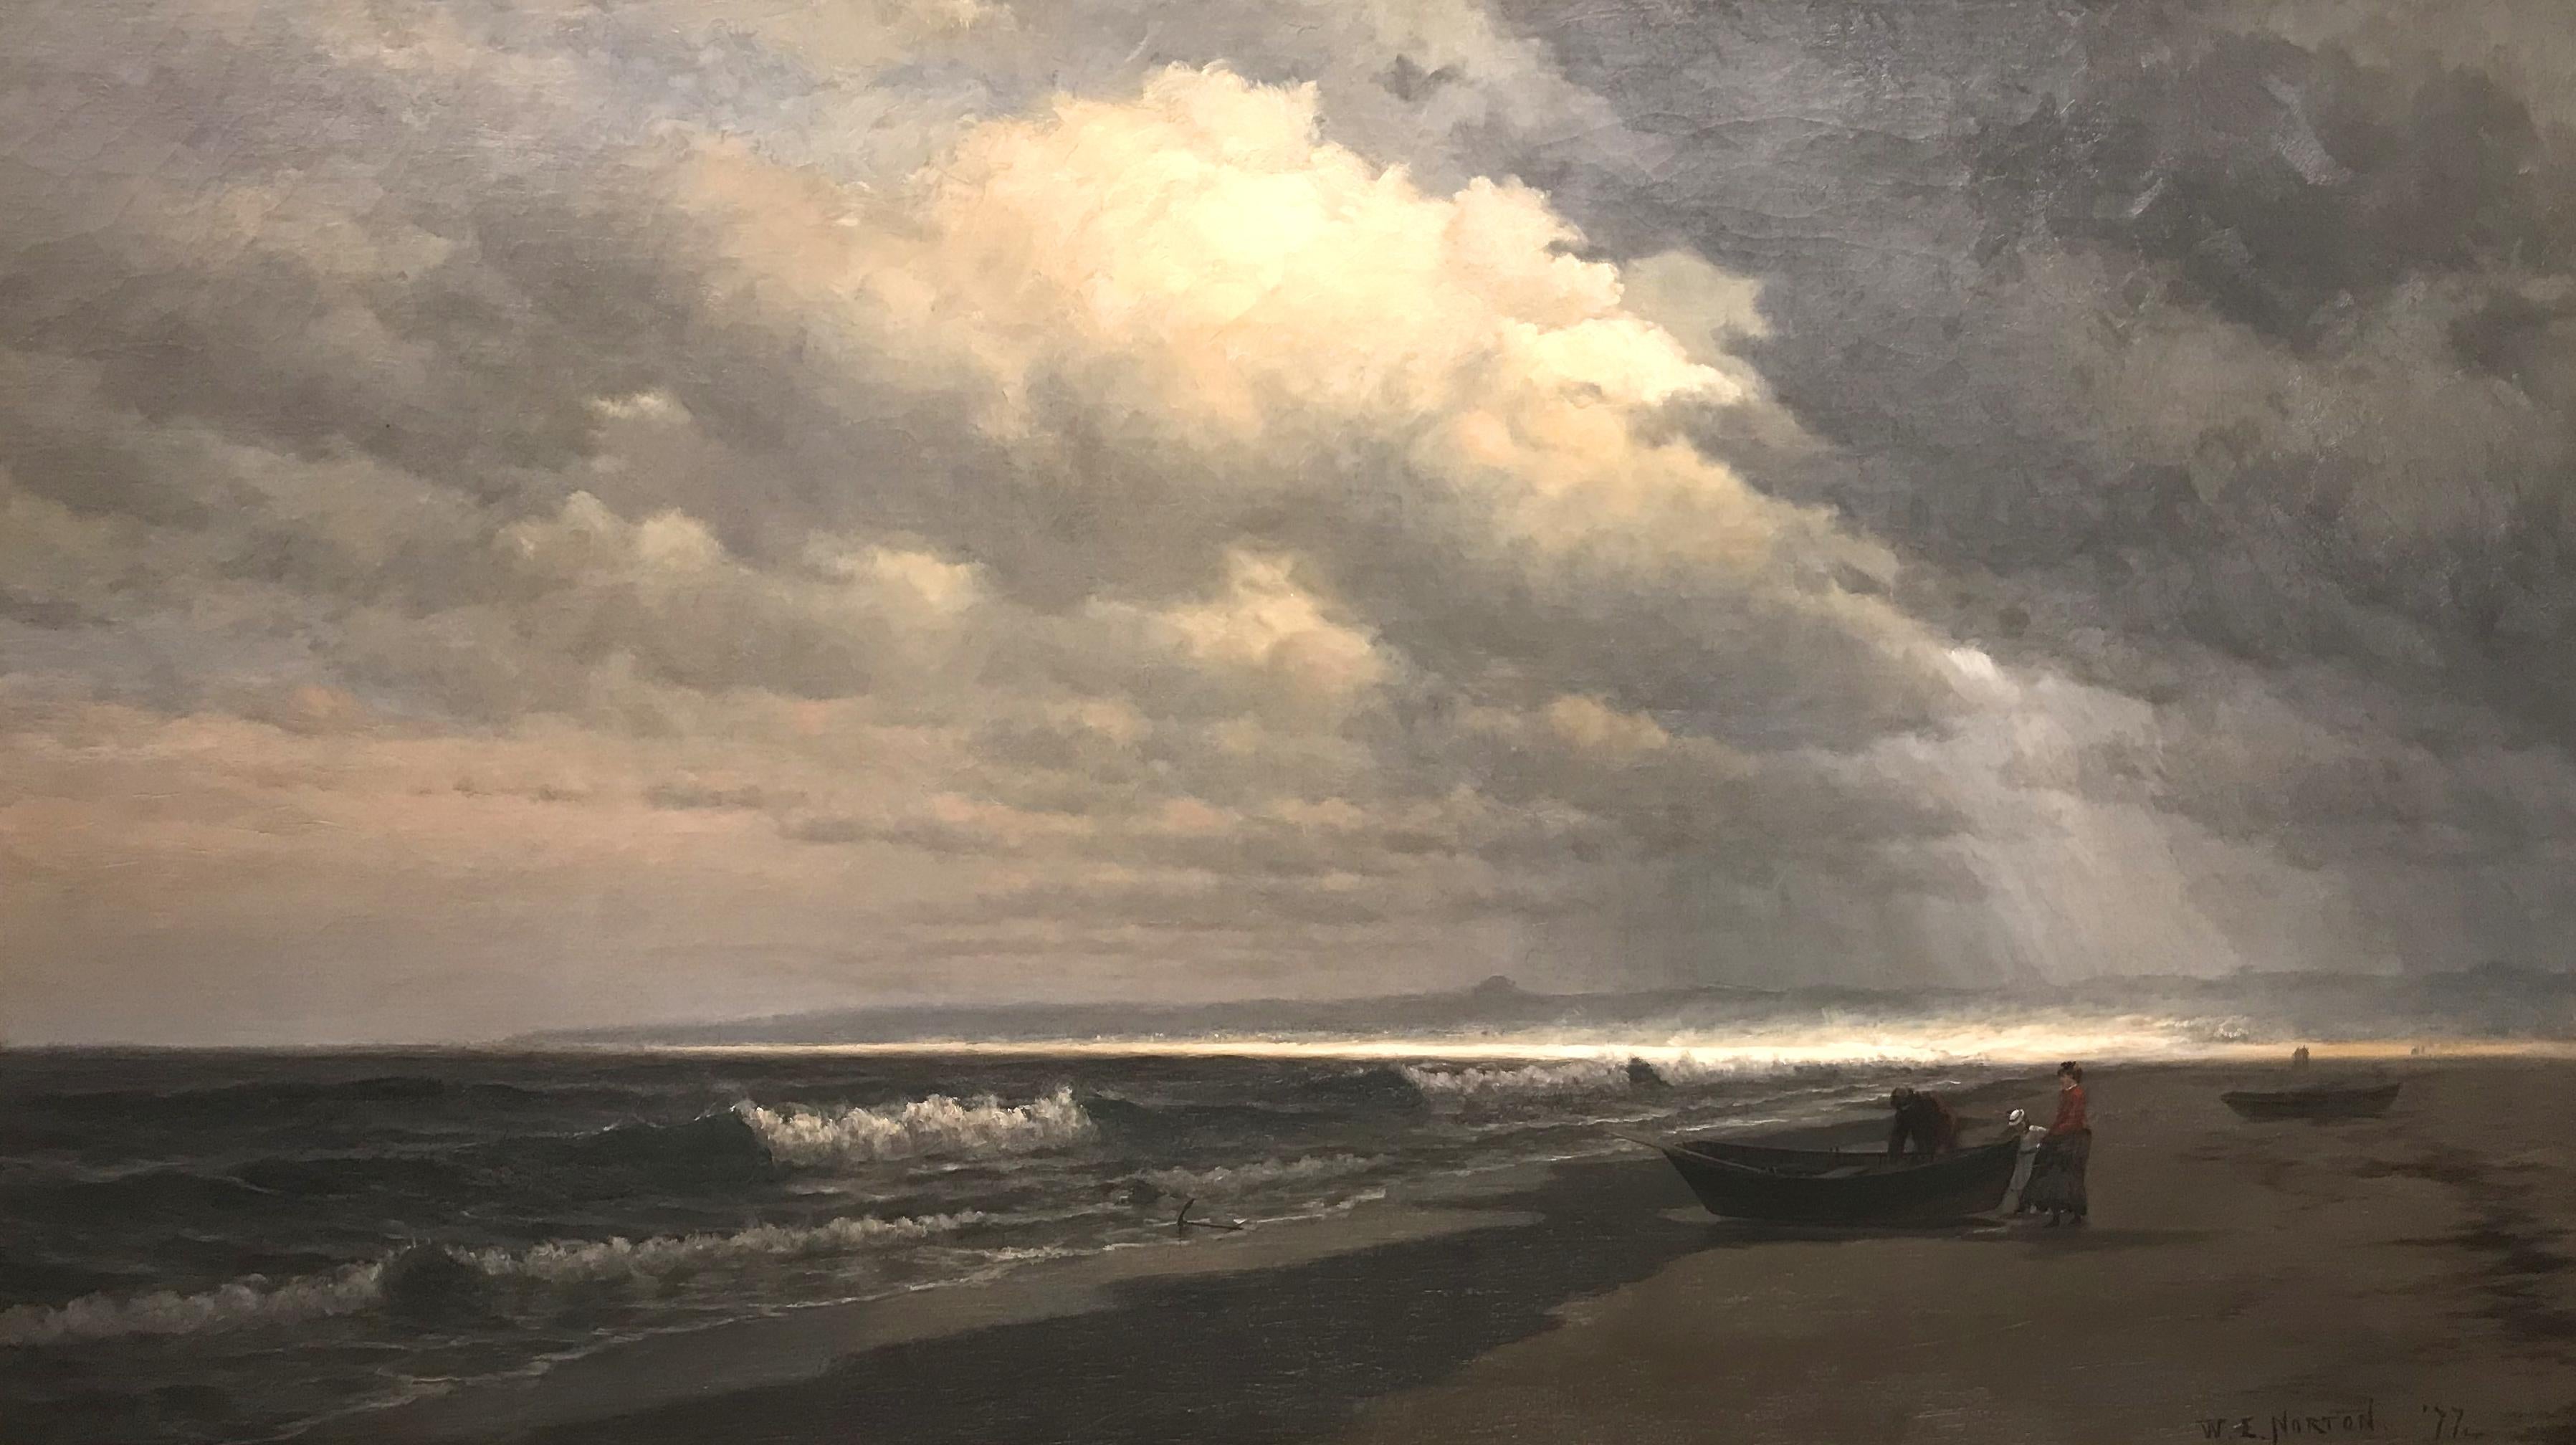 A large powerful marine coastal painting with clouds looming over figures and a dory on the beach painted by American artist William Edward Norton (1843-1916). Born in Boston, MA, Norton took to sailing at a young age, studying at the Lowell